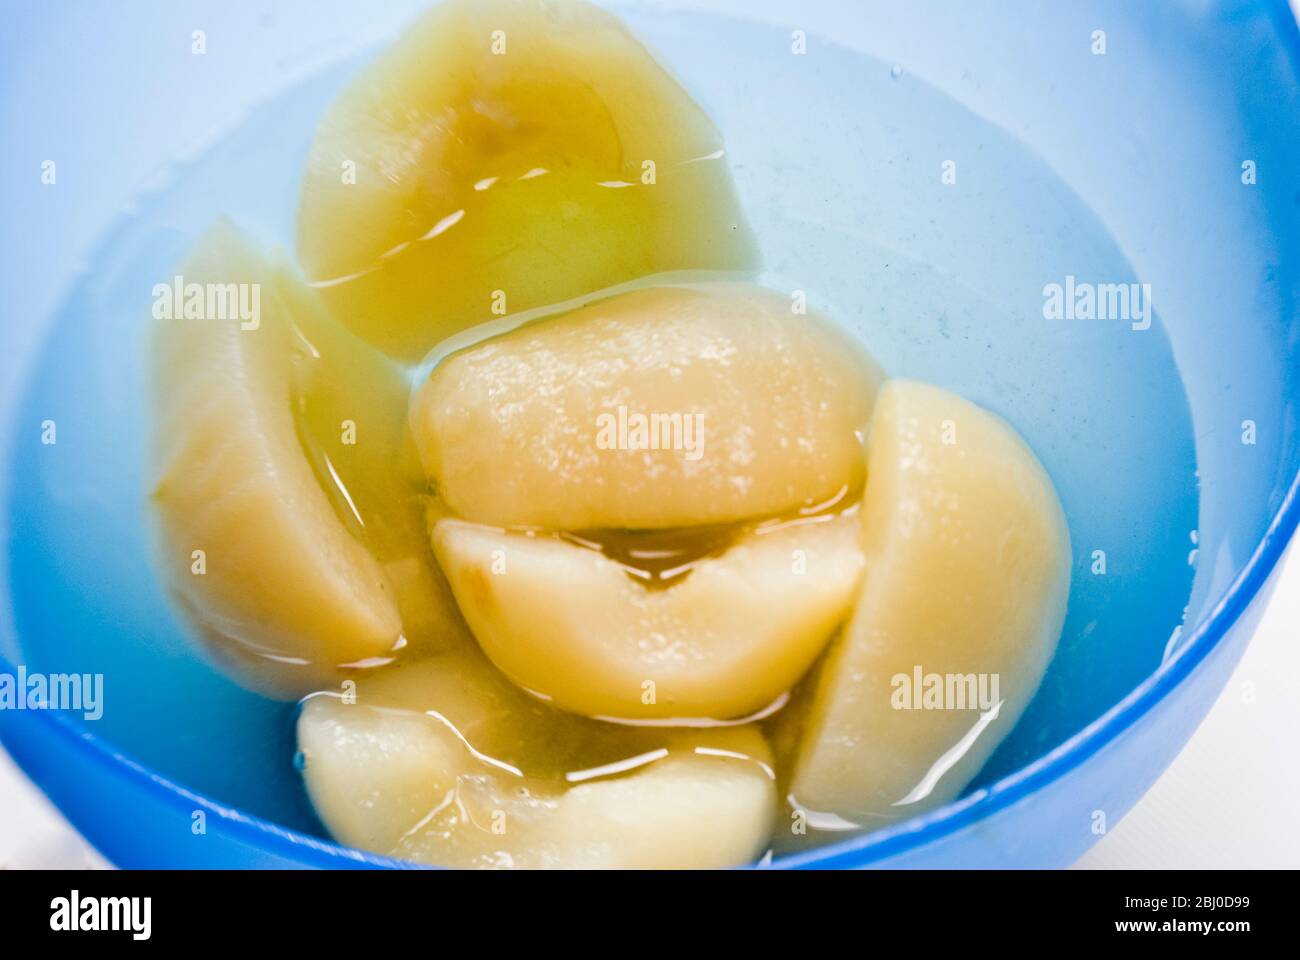 Canned Bartlett pears opened and turned into a blue bowl - Stock Photo